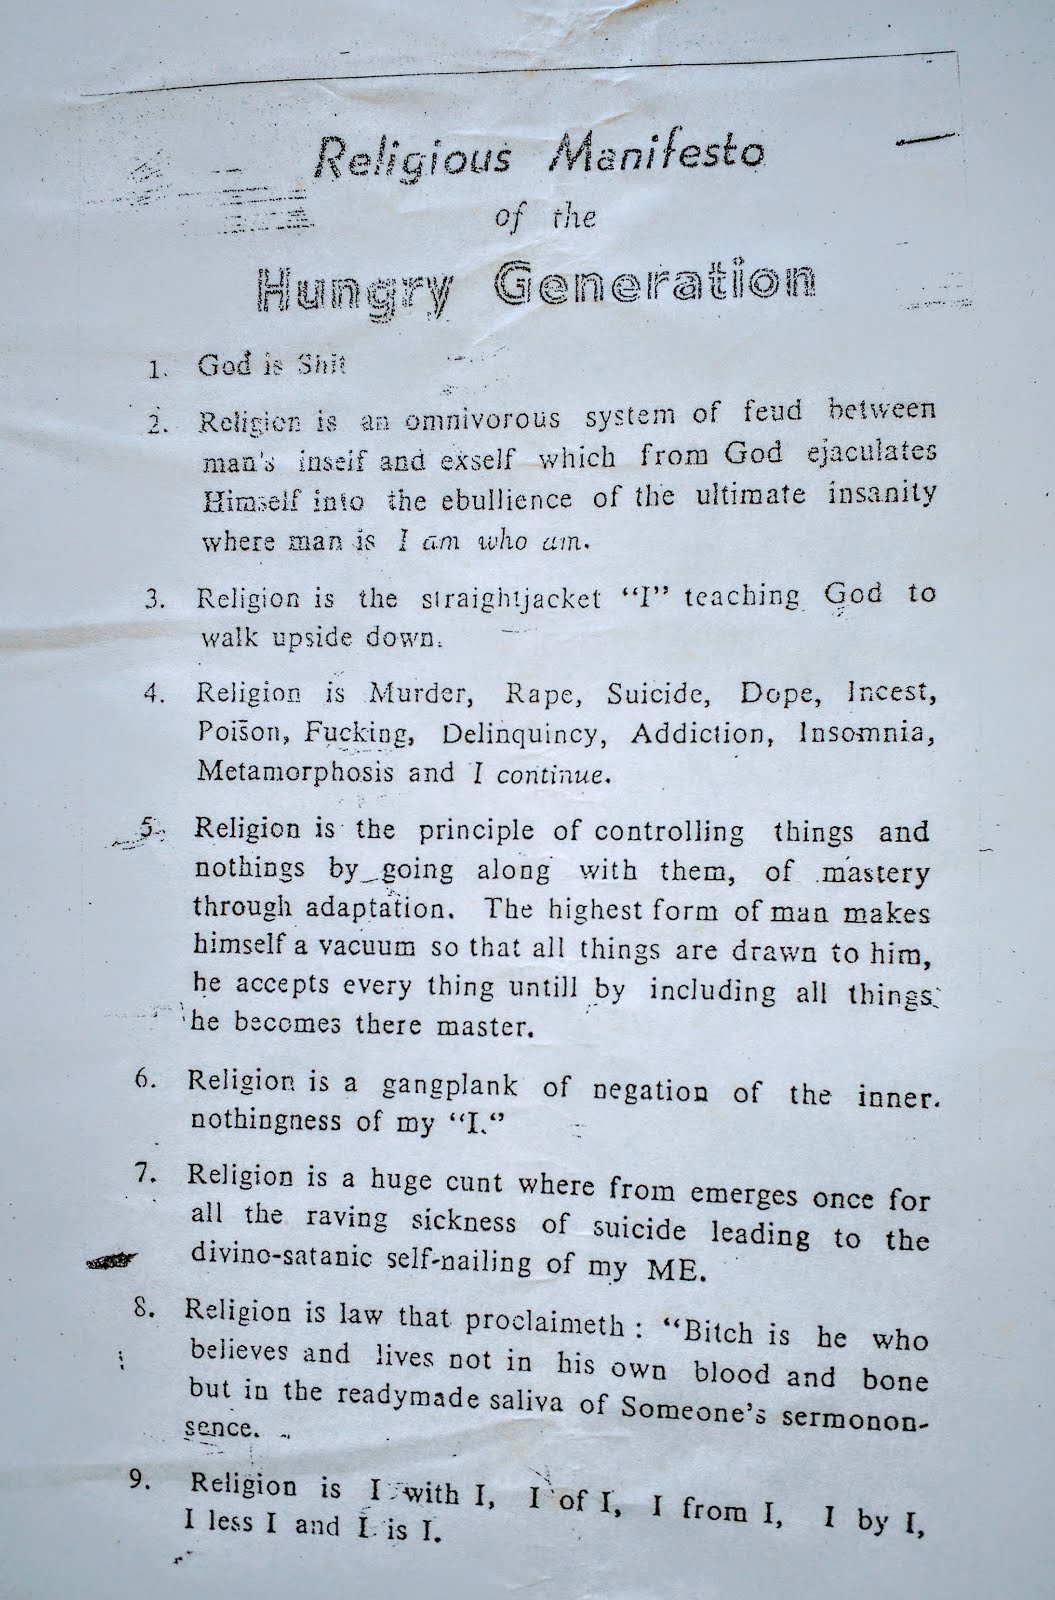 Hungryalist bulletin No 65 published in 1963